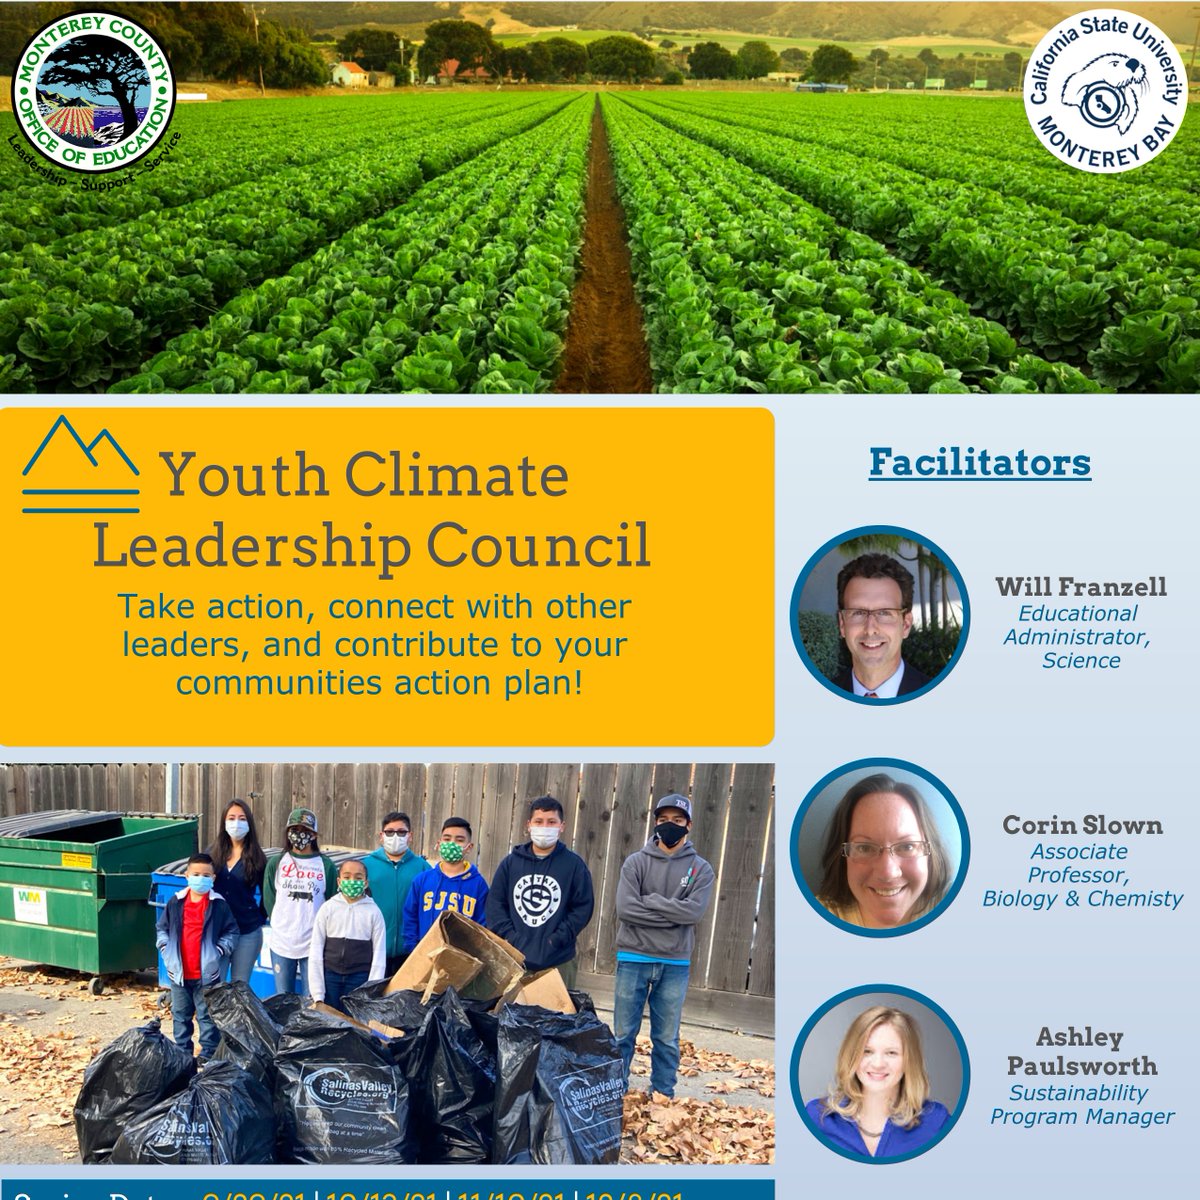 Join the Youth Climate Leadership Council! Take action, connect with other leaders, and contribute to your communities action plan! @WilliamFranzell @ElGovEcon @pk12innovation @MCOE_Now @WeCountWeRise @CslownRasco 

#EnviroLiteracy 

Register here: monterey.k12oms.org/1519-207910